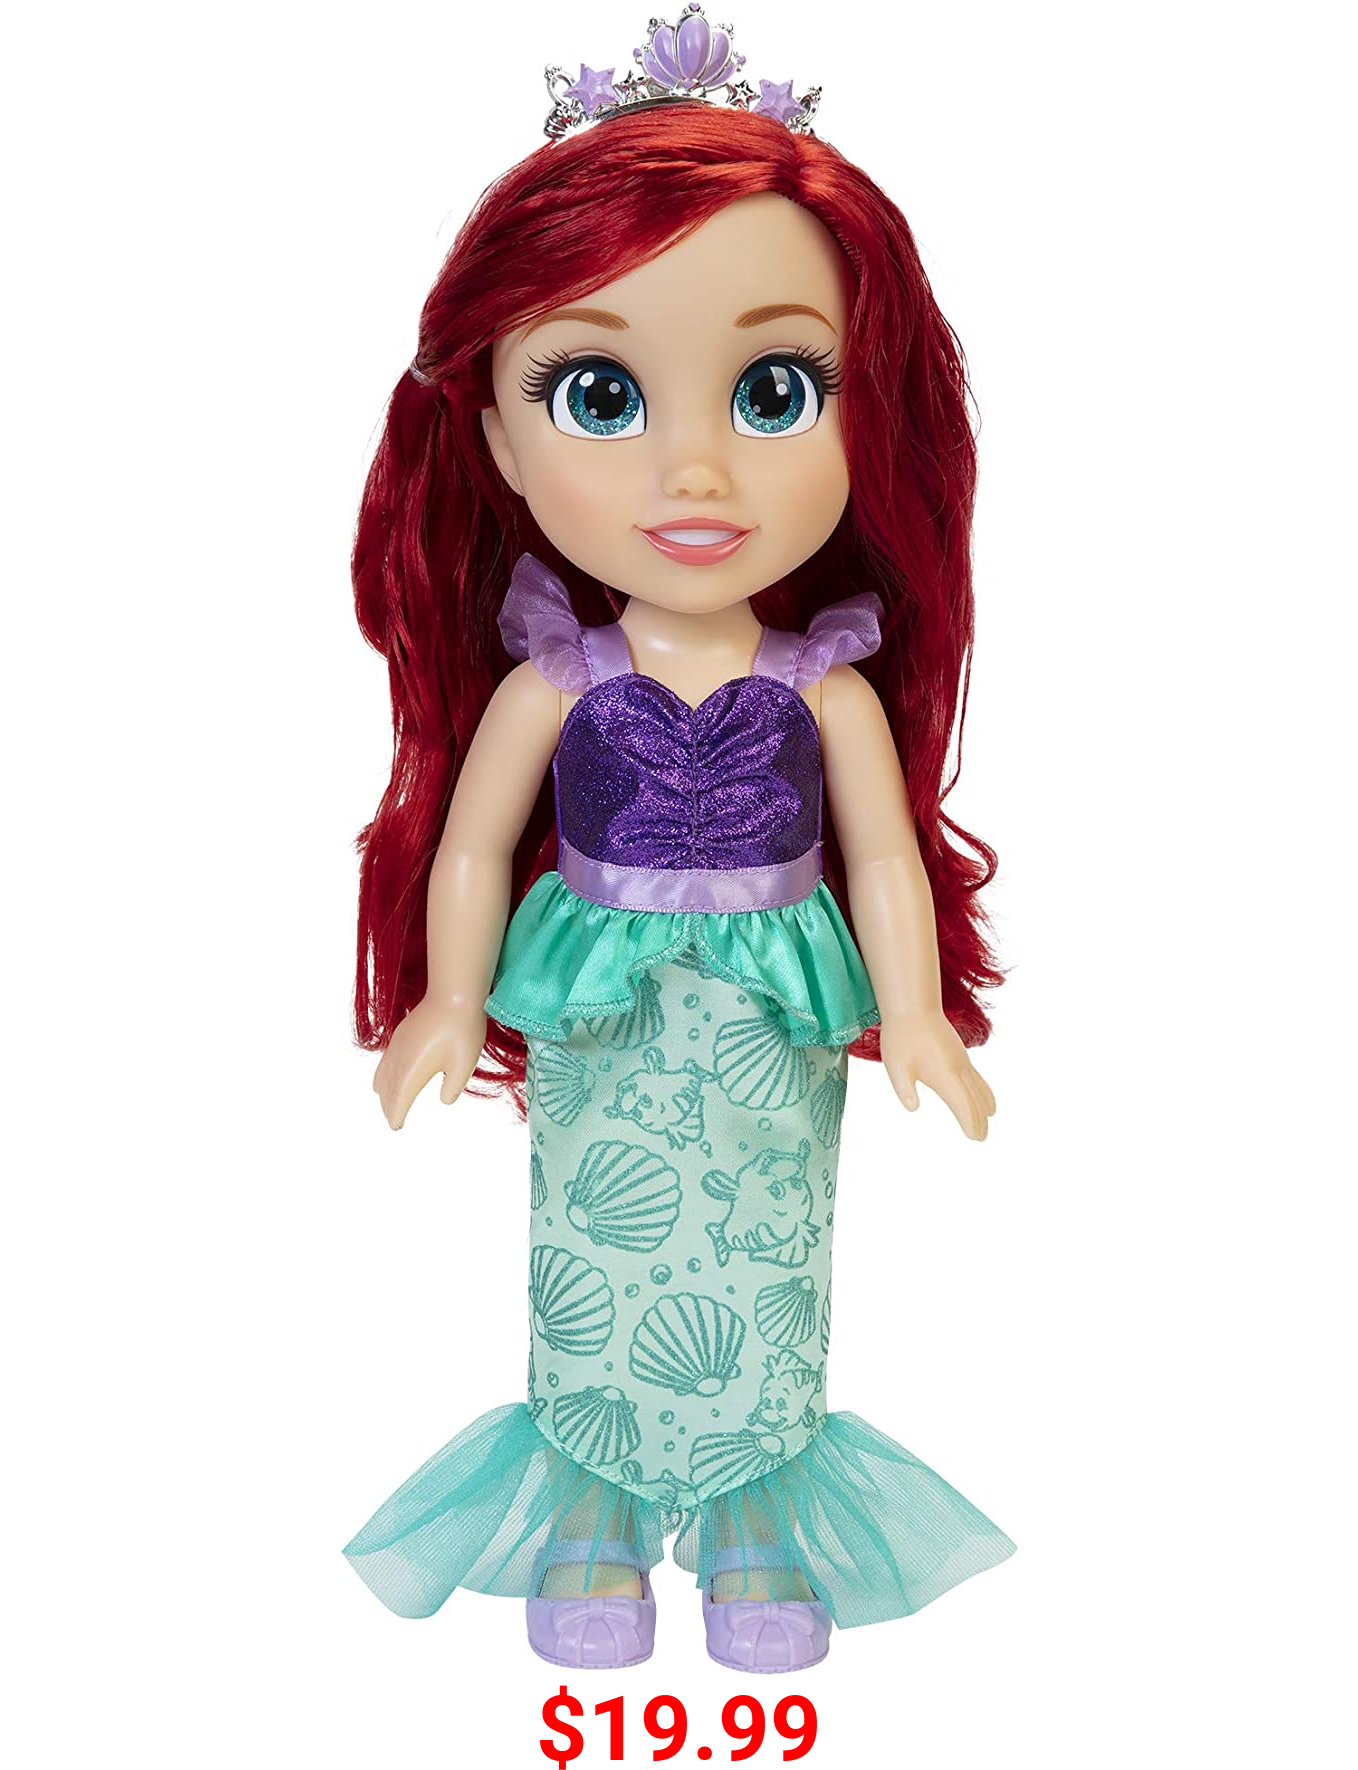 Disney Princess My Friend Ariel Doll 14" Tall Includes Removable Outfit and Tiara